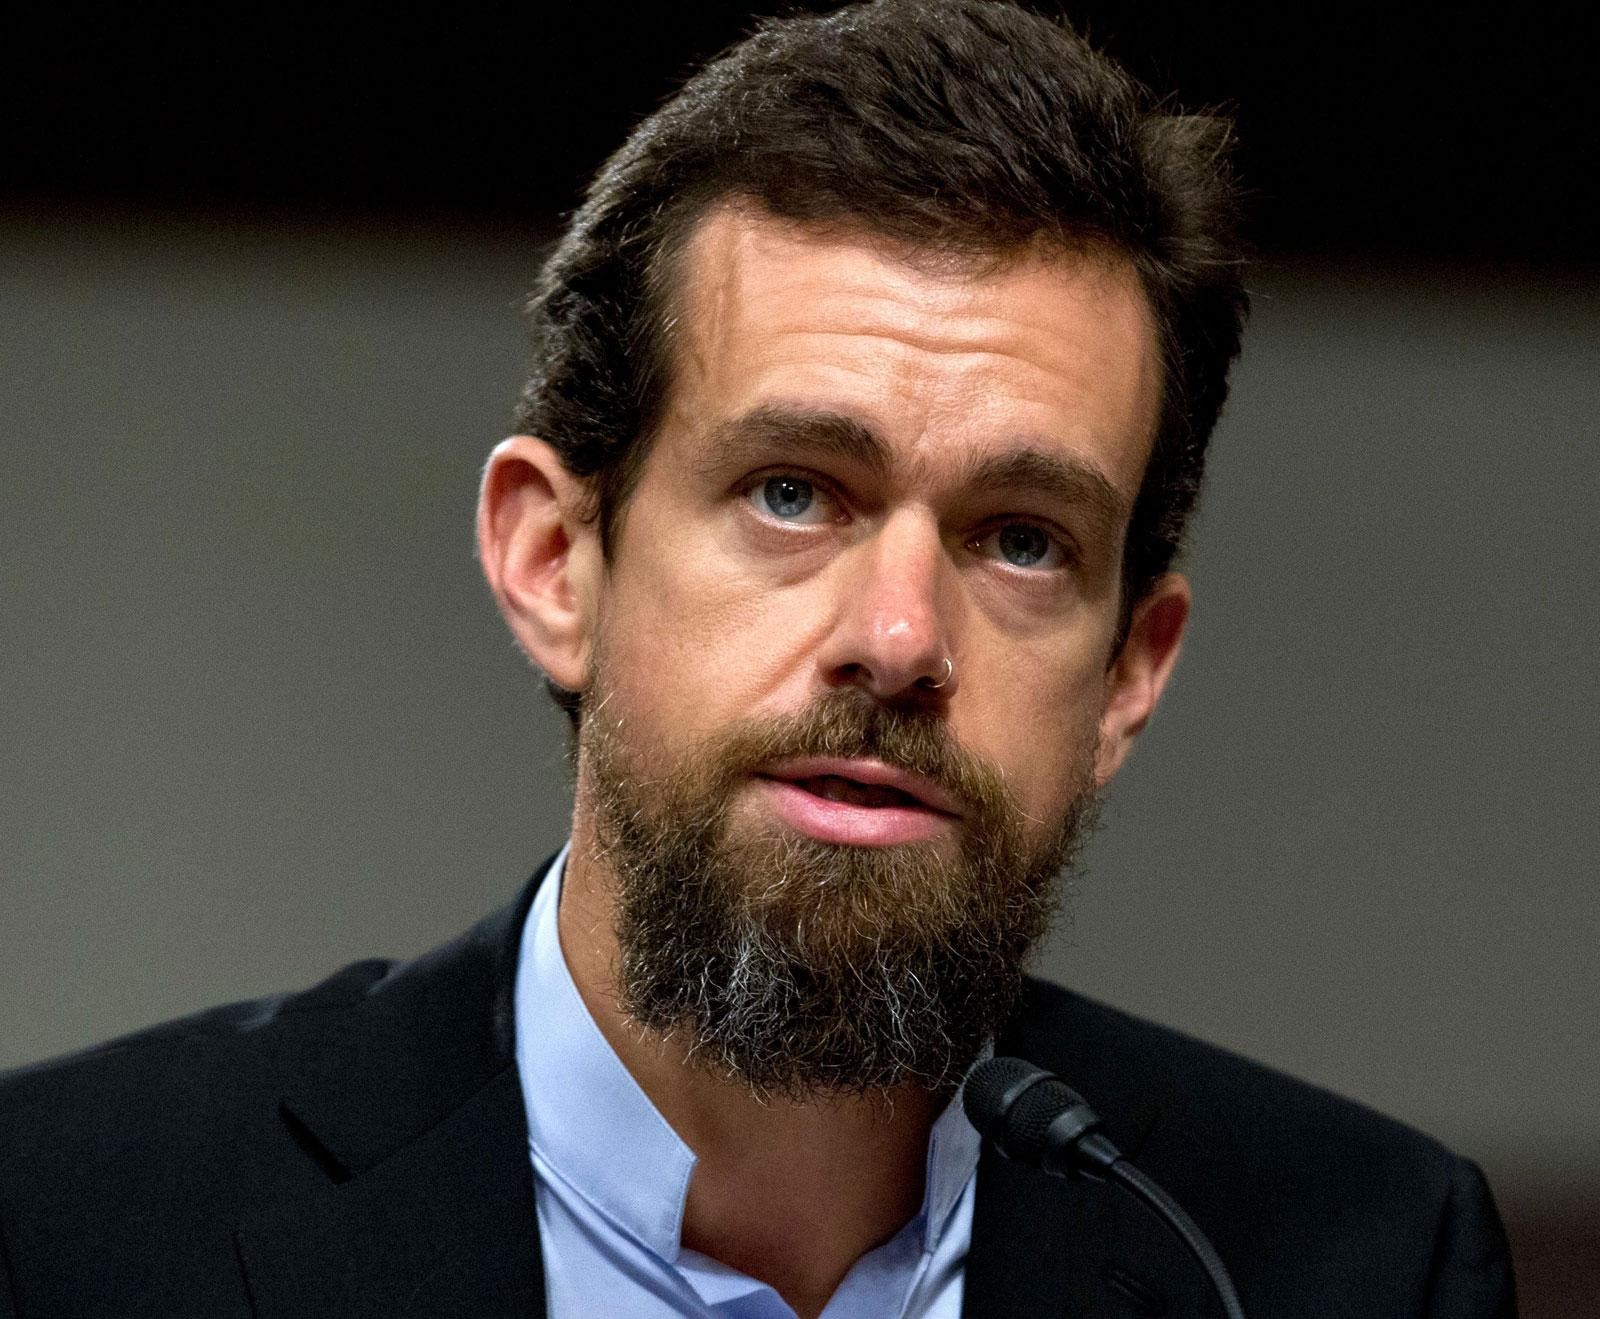 Jack Dorsey, founder, Twitter and Square, Source: Britannica